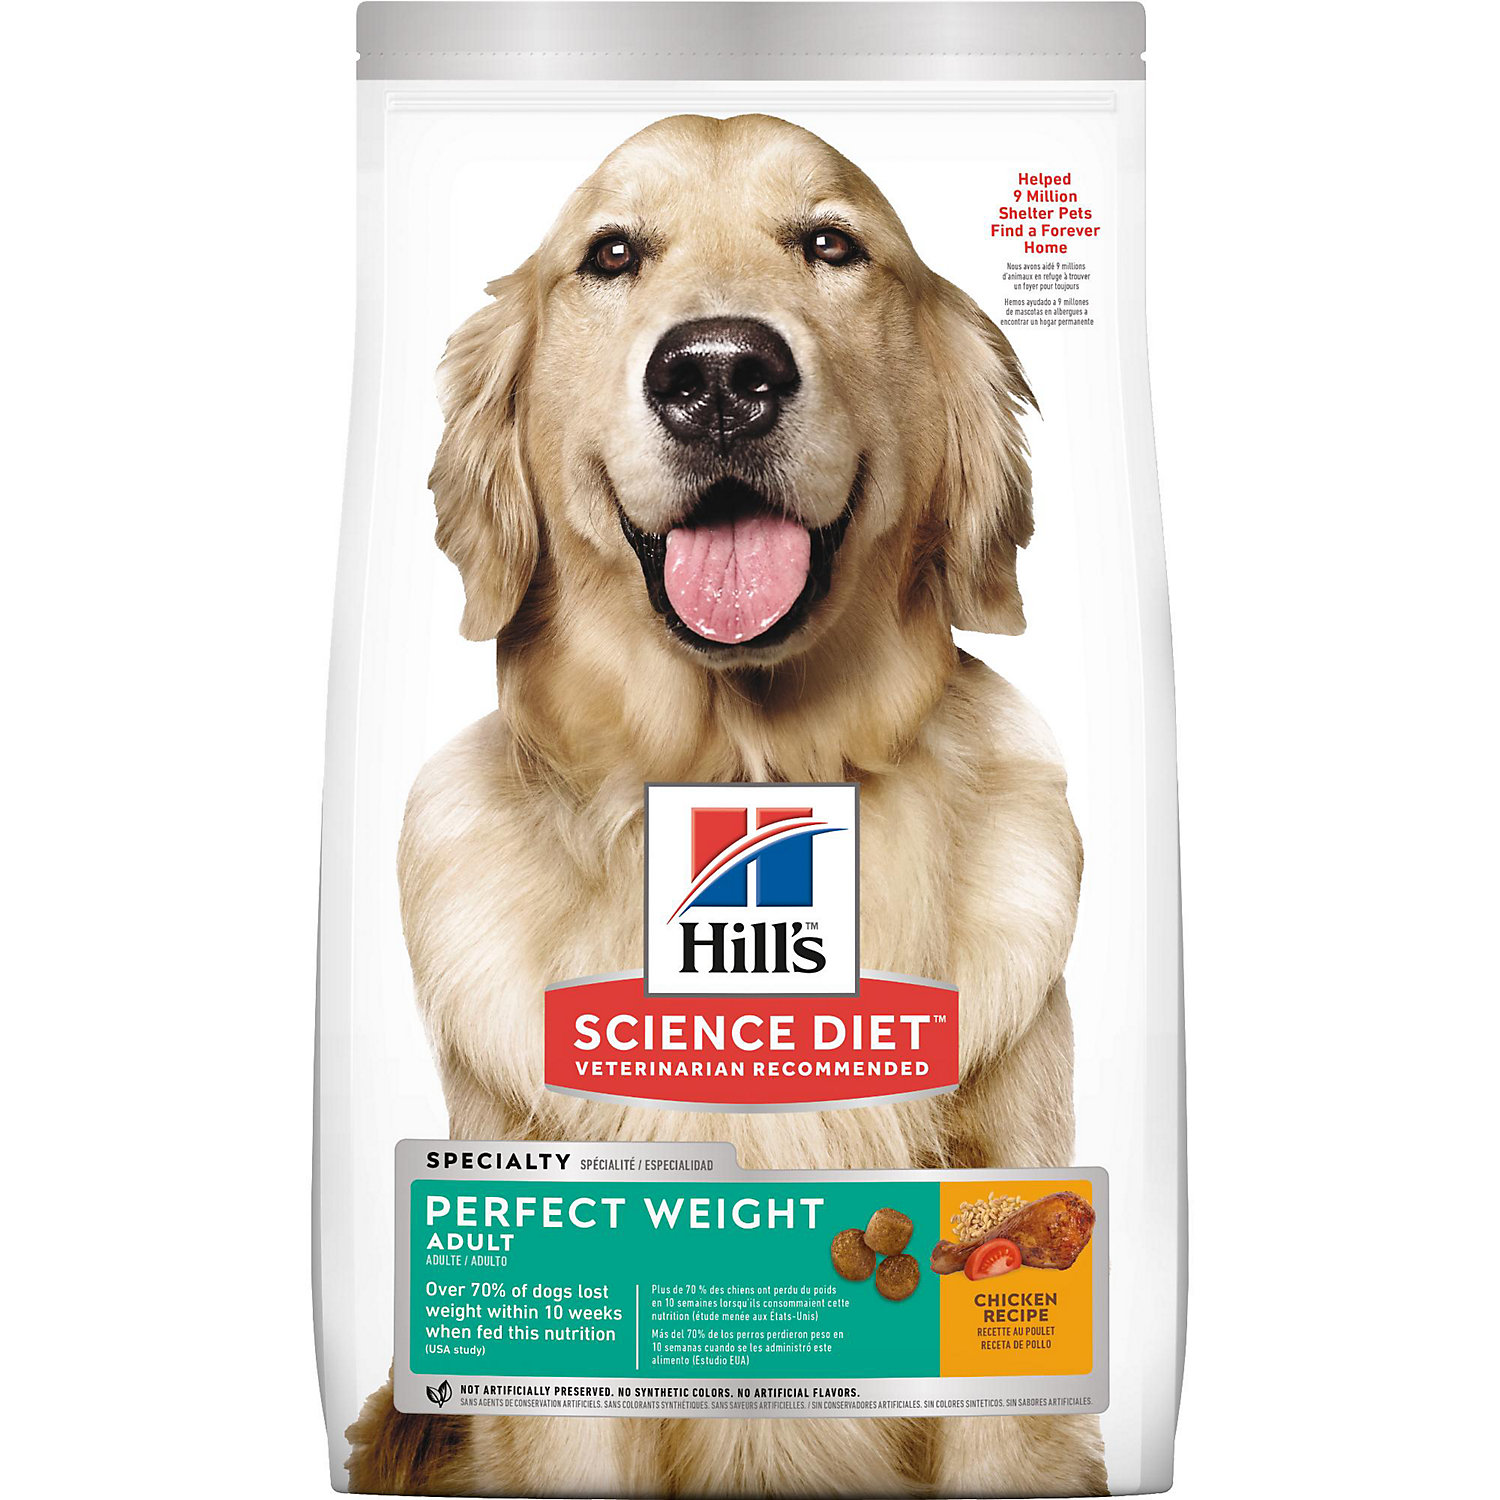 Hill's Science Diet Perfect Weight Adult Dog Food, 28.5 lbs